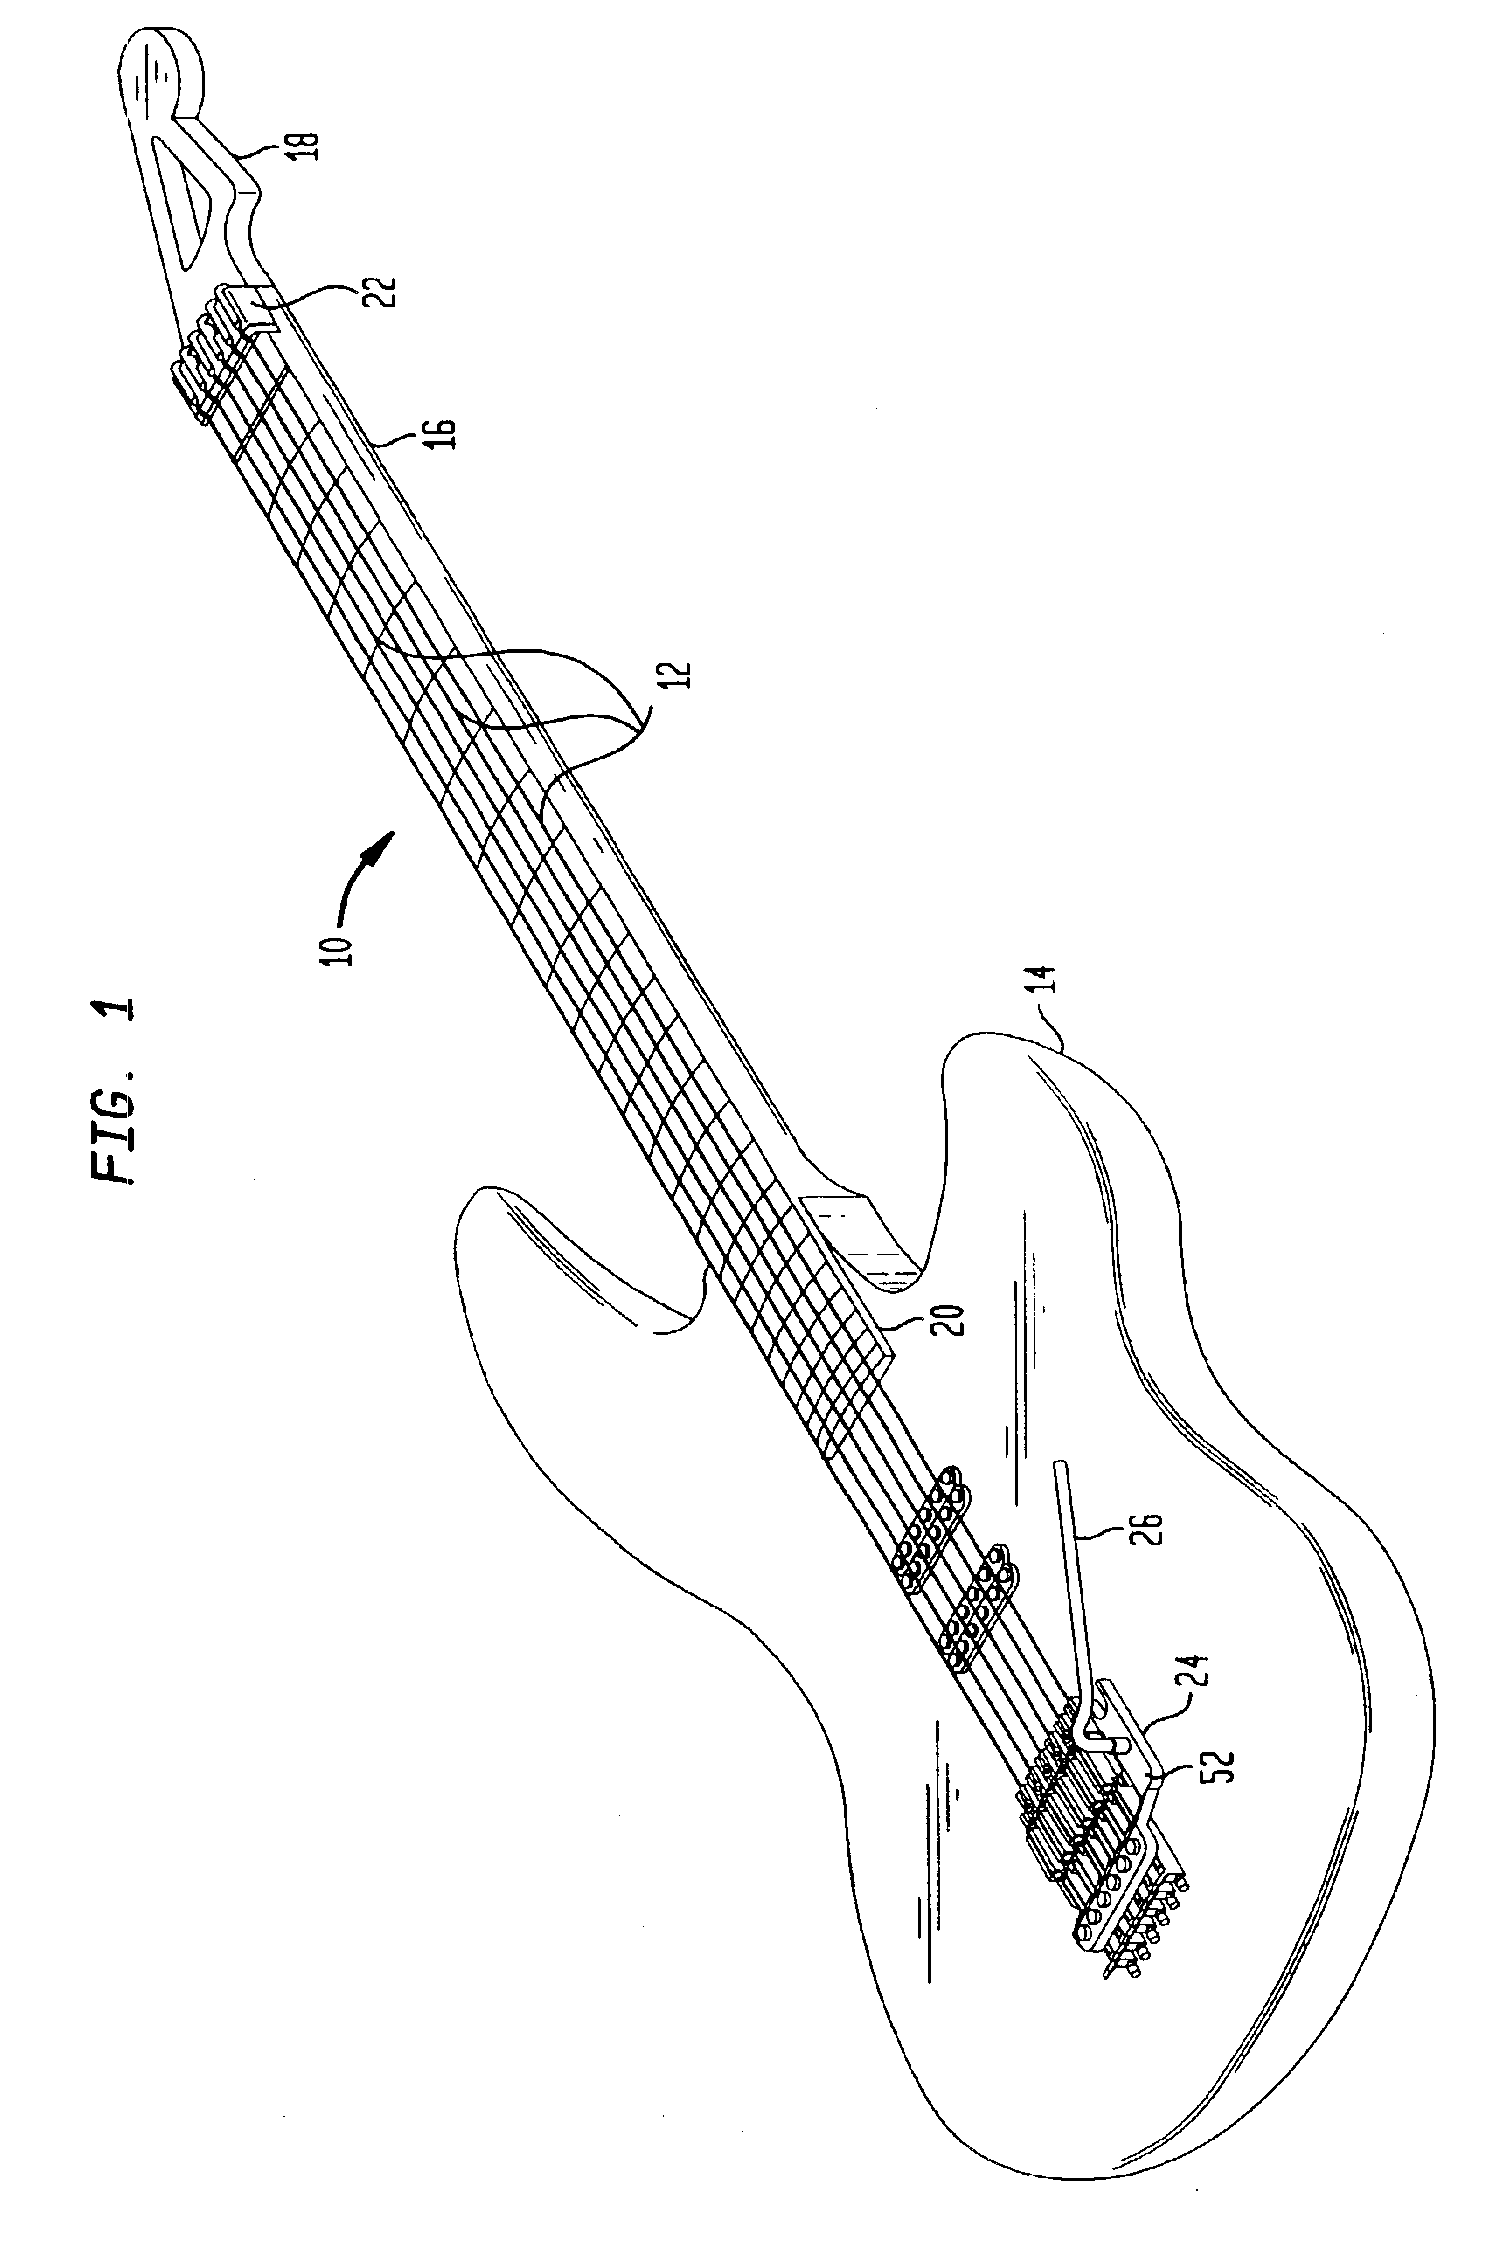 Tuning systems for stringed musical instruments